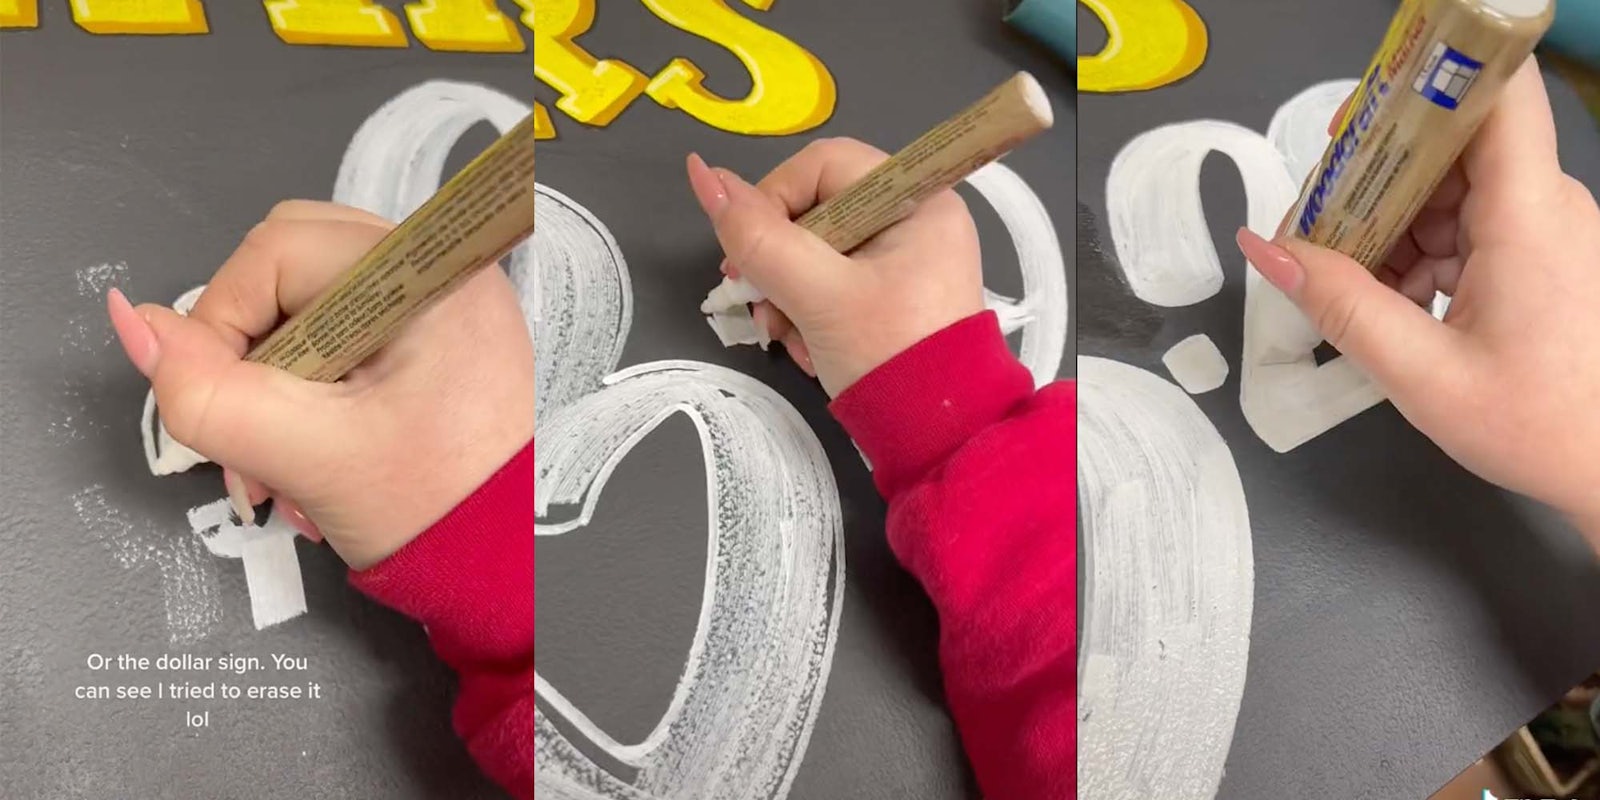 A Trader Joe's sign artist shows how she paints a sign.